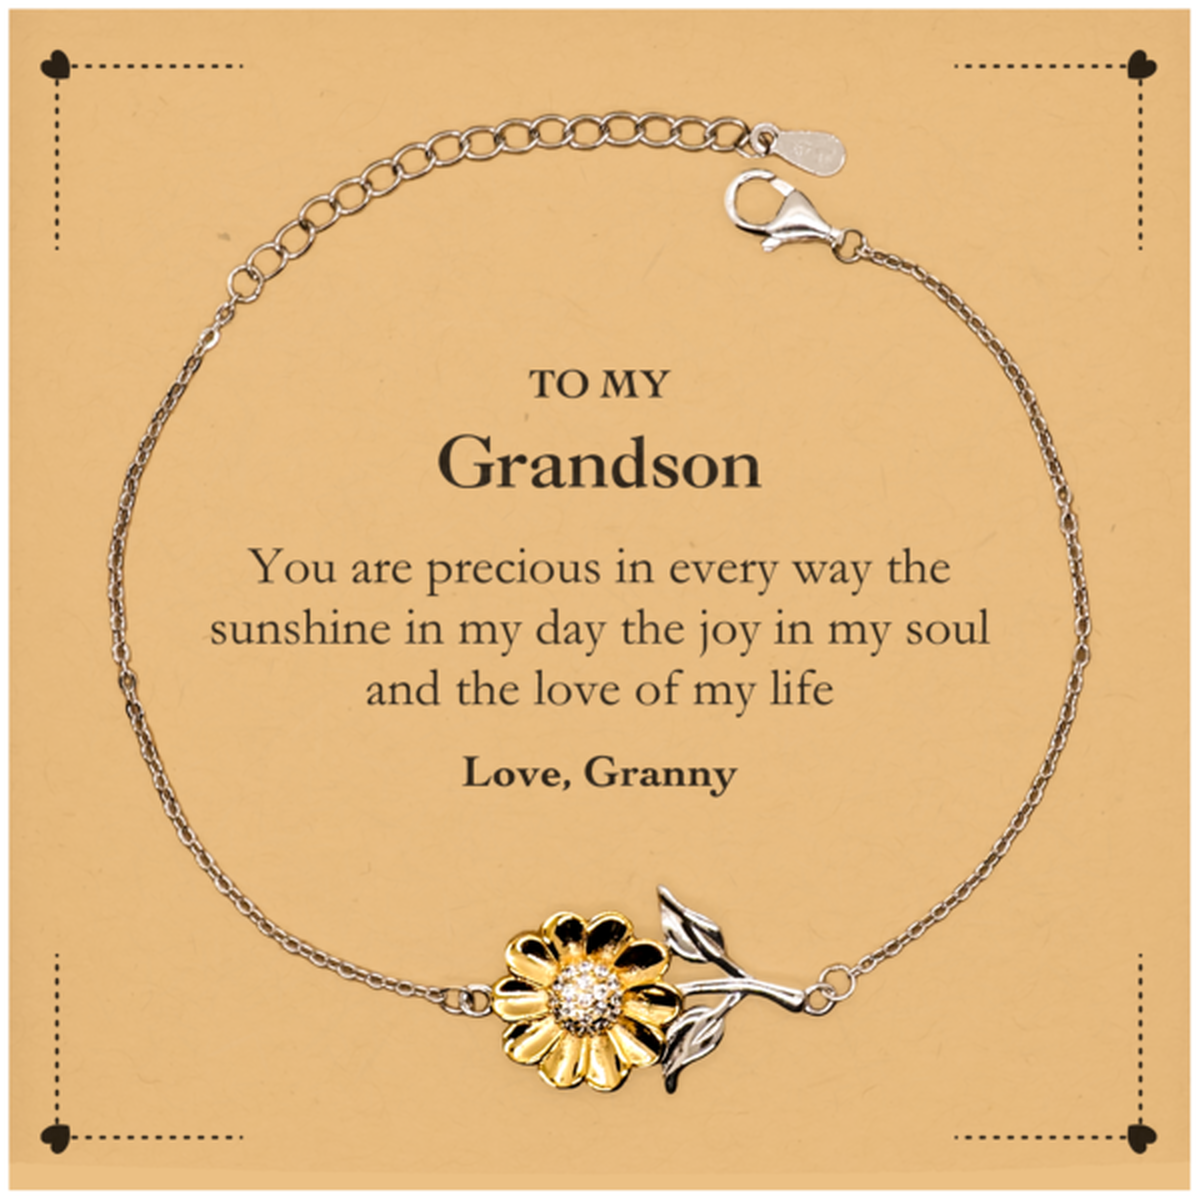 Graduation Gifts for Grandson Sunflower Bracelet Present from Granny, Christmas Grandson Birthday Gifts Grandson You are precious in every way the sunshine in my day. Love, Granny